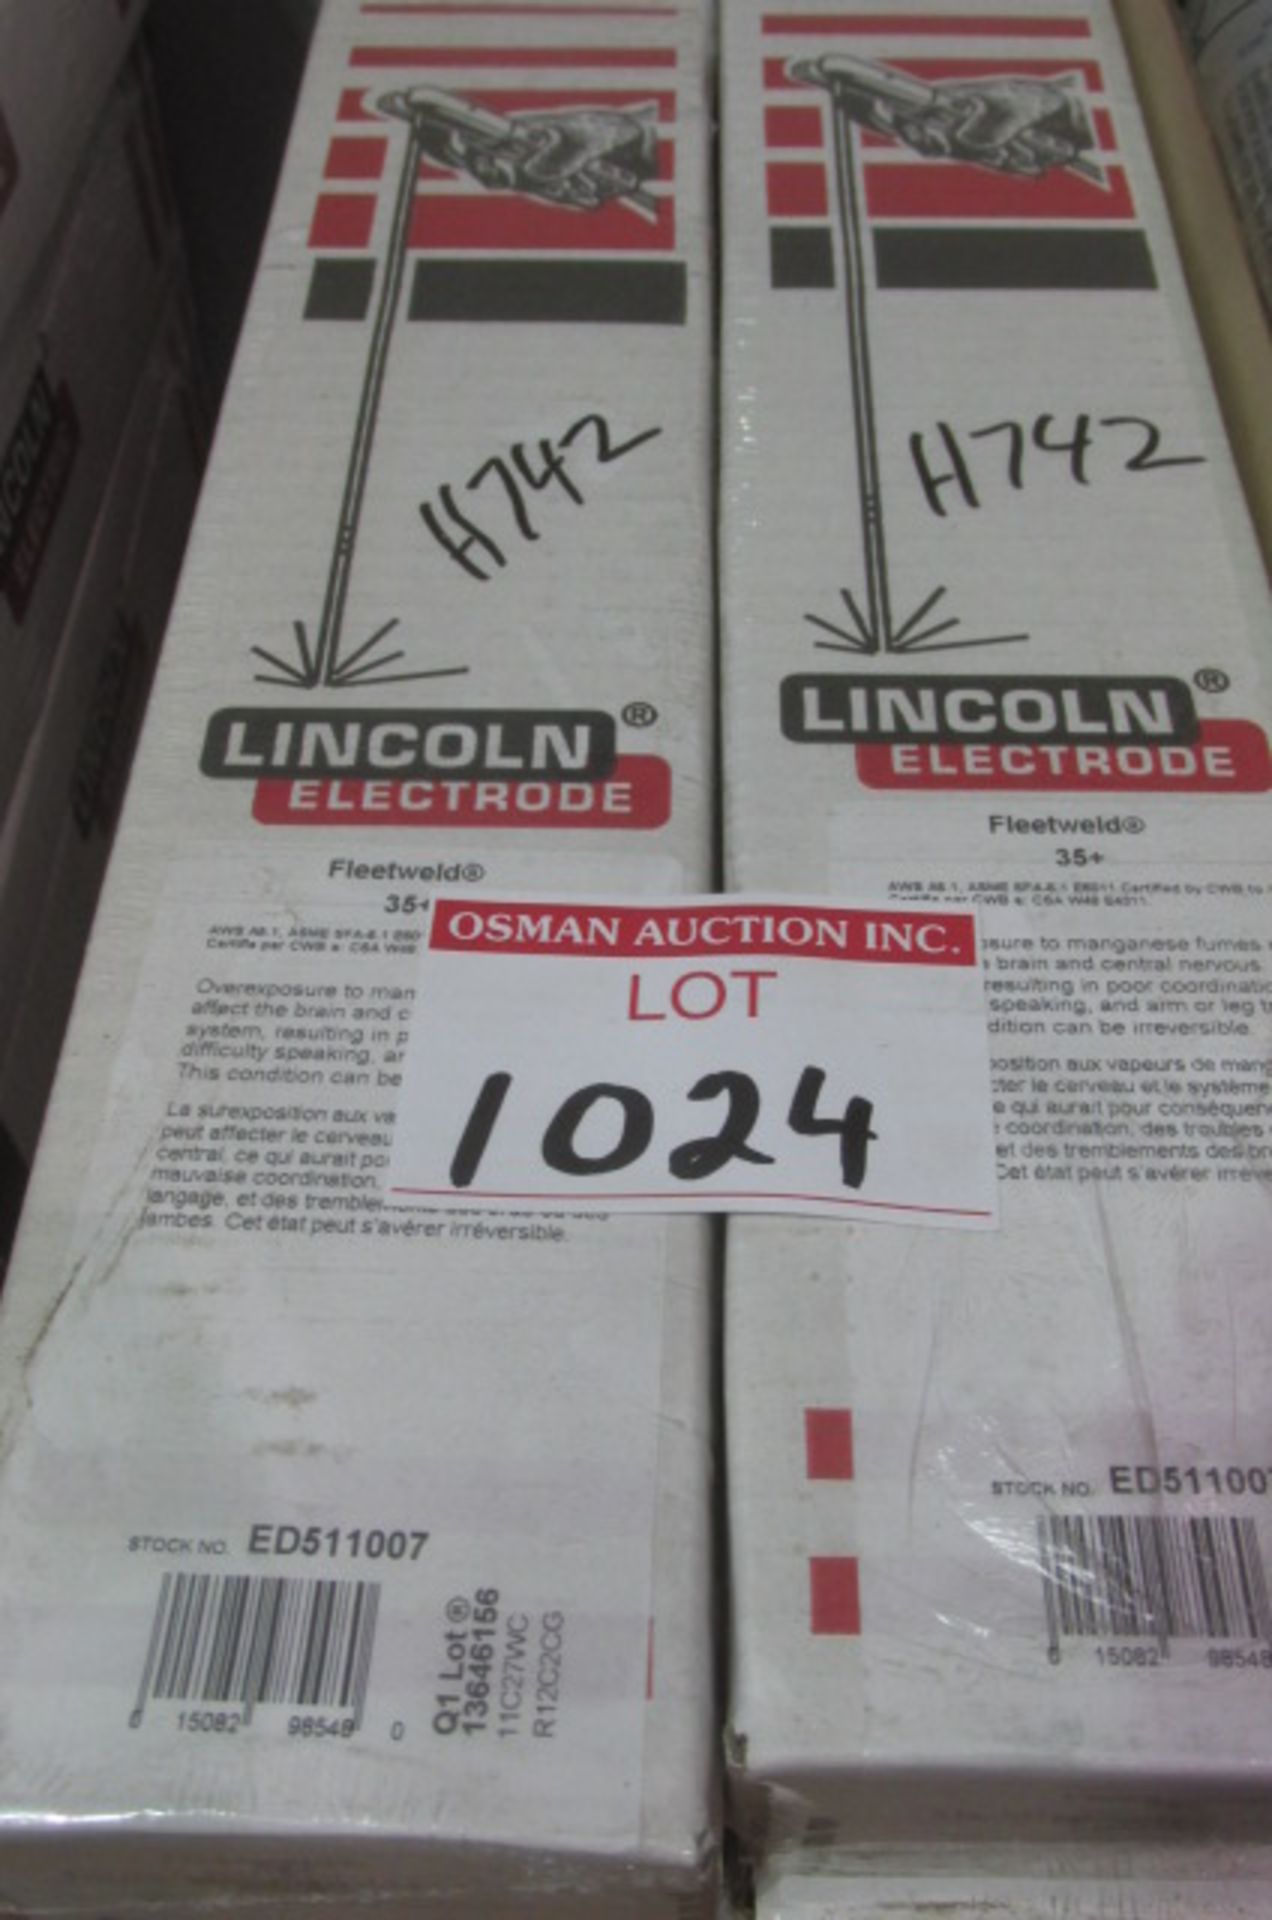 PACKAGE OF 4 BOXES OF LINCOLN 1/8" WELDING ROD